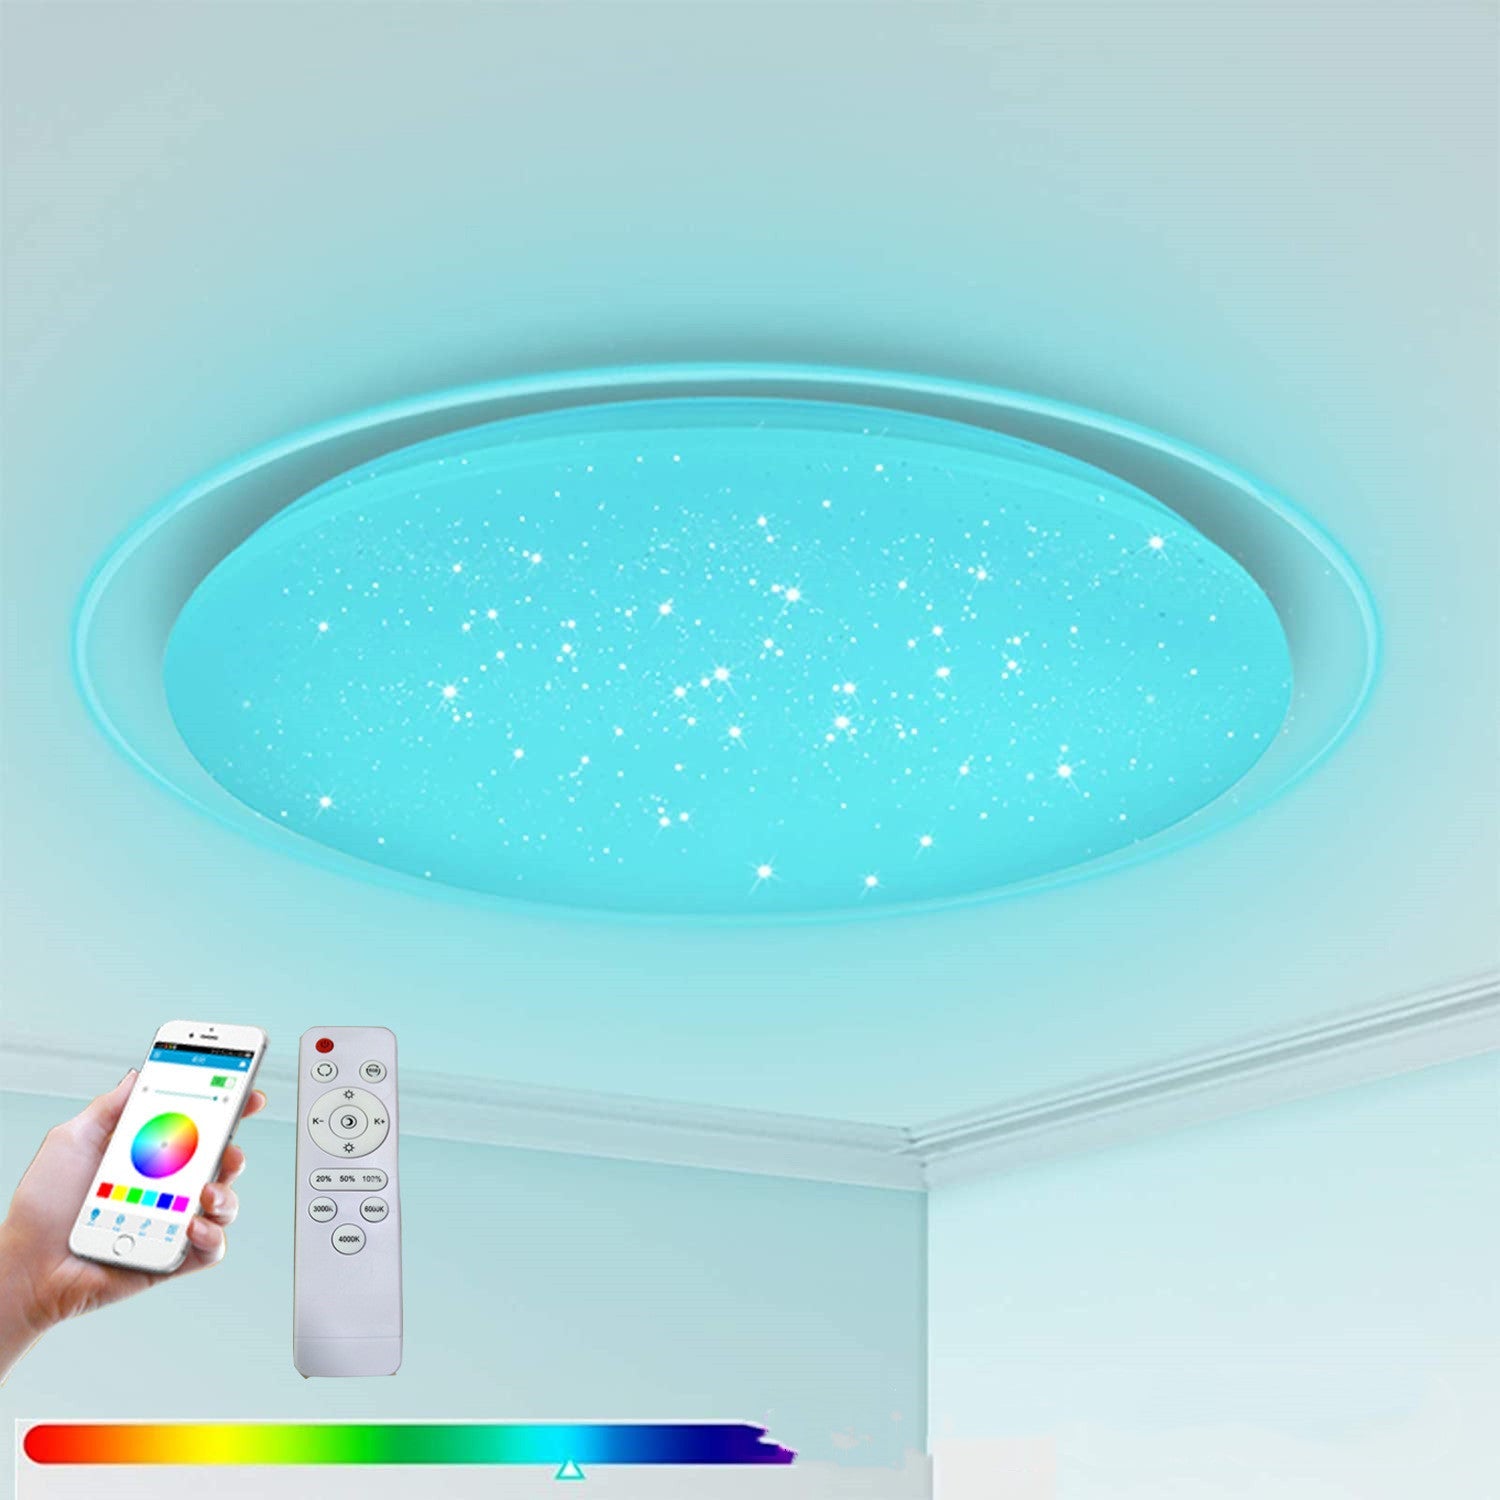 Bluetooth Smart Music App Controls The Led Ceiling Light - Ambient Lights -  Trend Goods